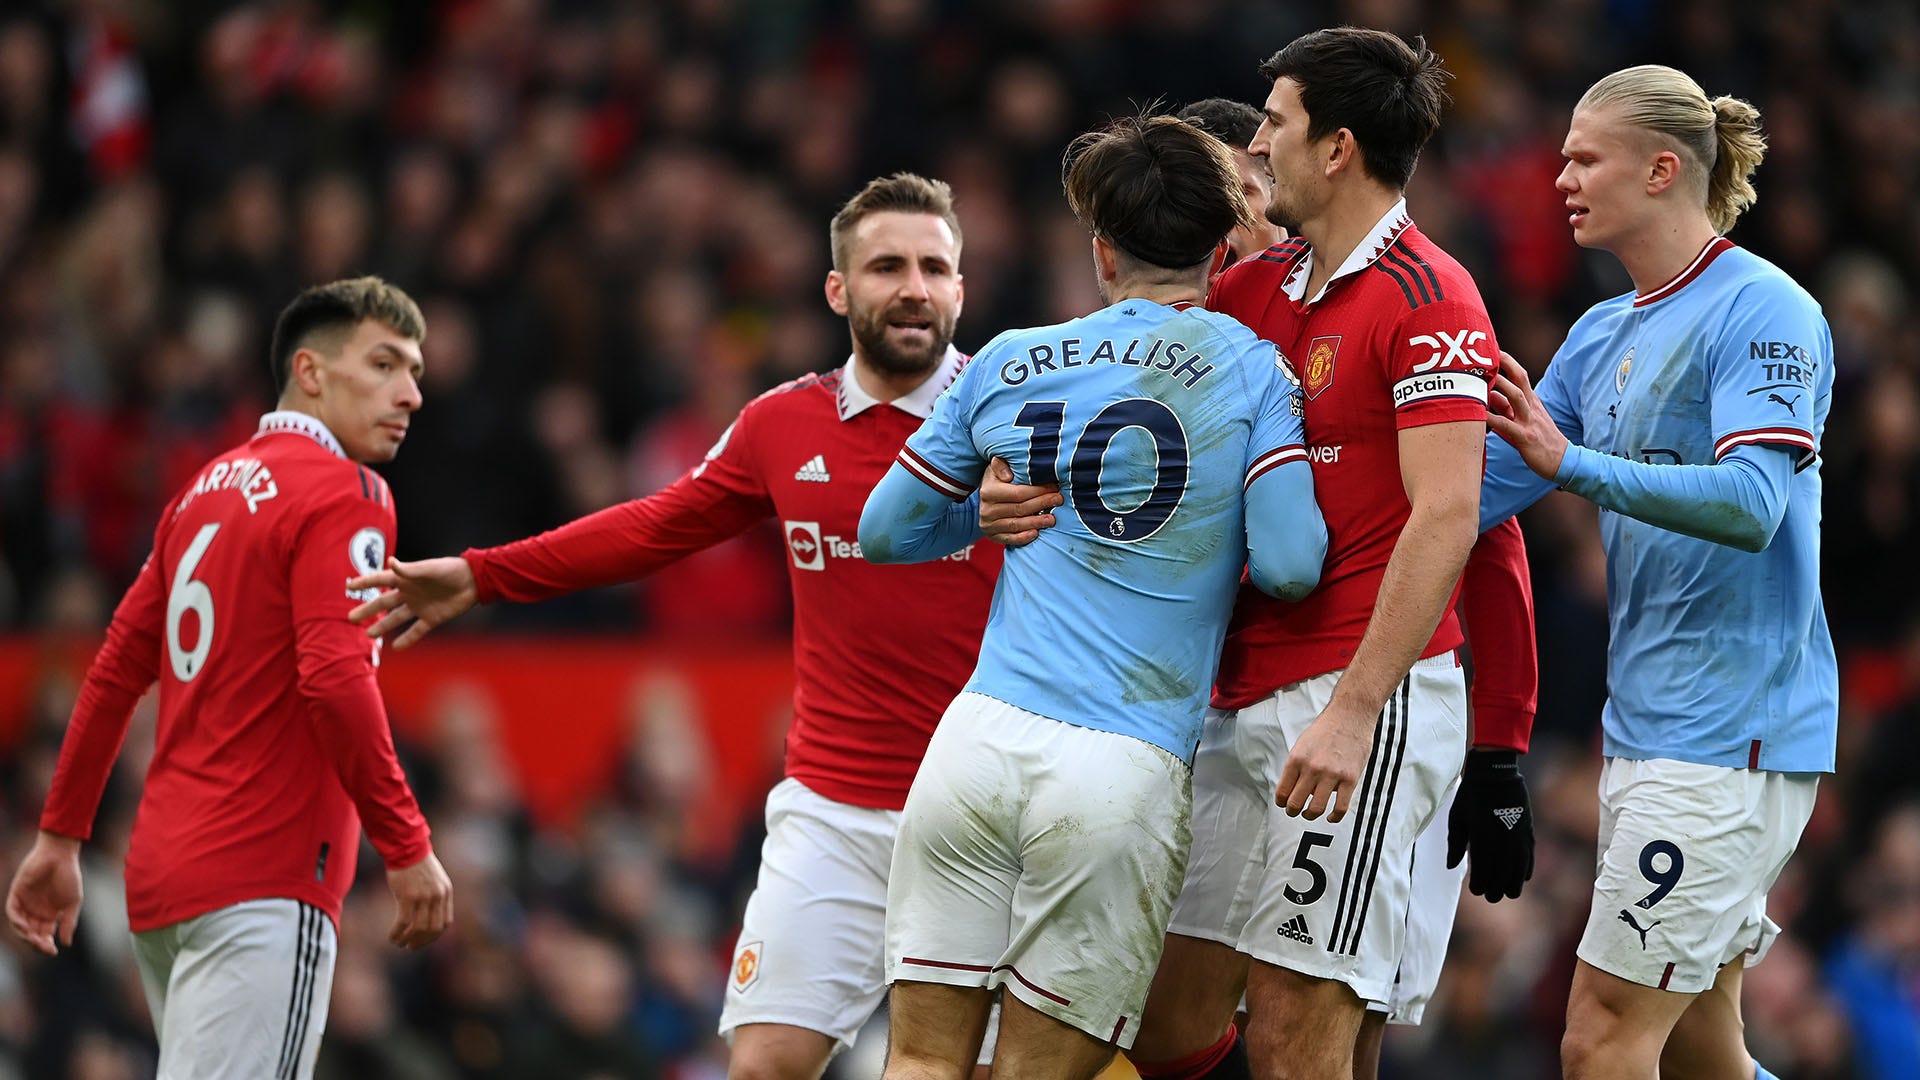 Explained Why the Man Utd vs Man City FA Cup final kickoff time has